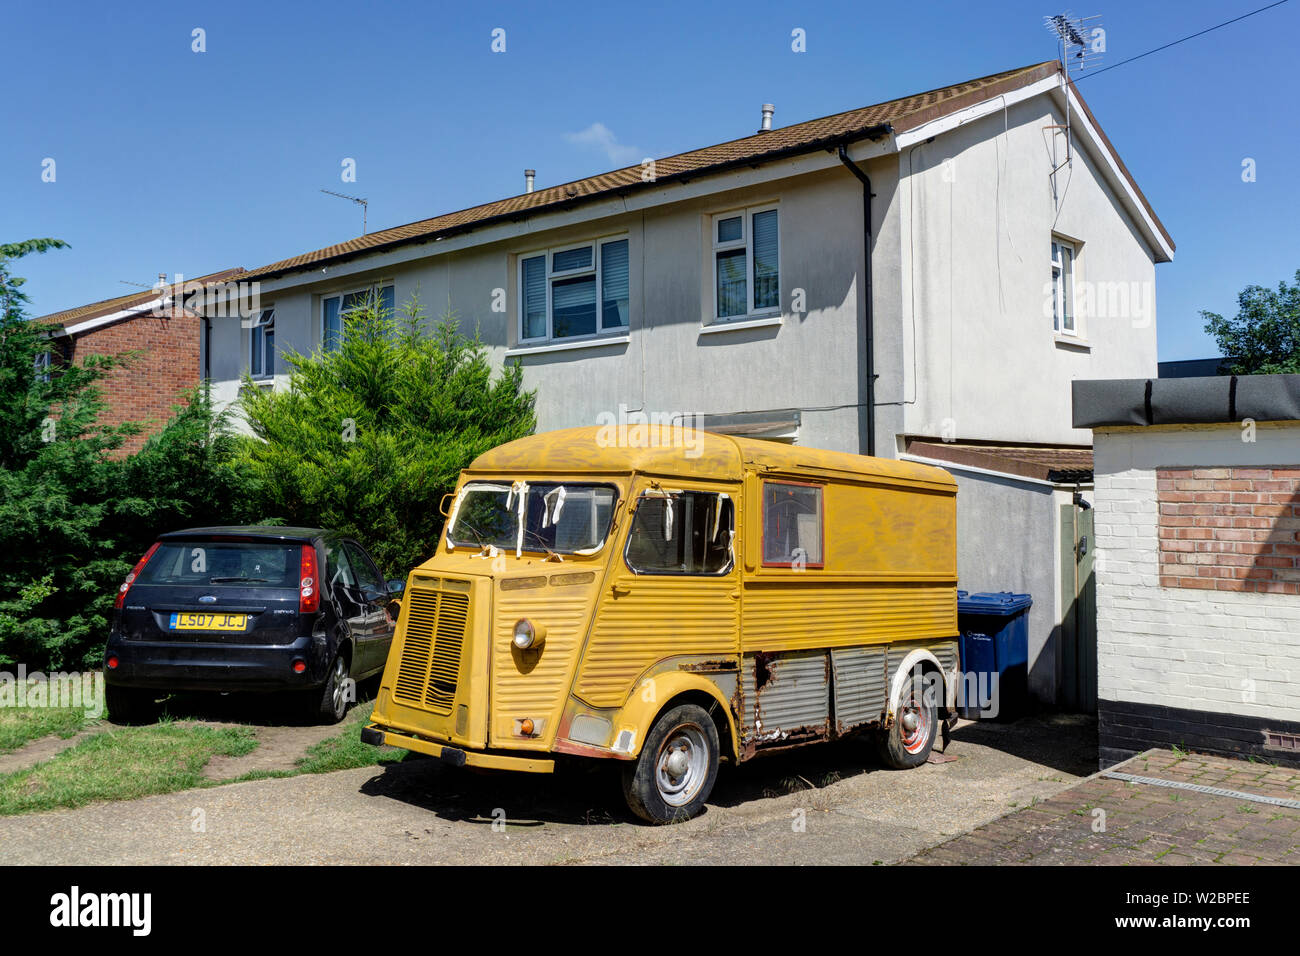 vintage citroen yellow corrugated van parked out side former council estate  UK england Stock Photo - Alamy